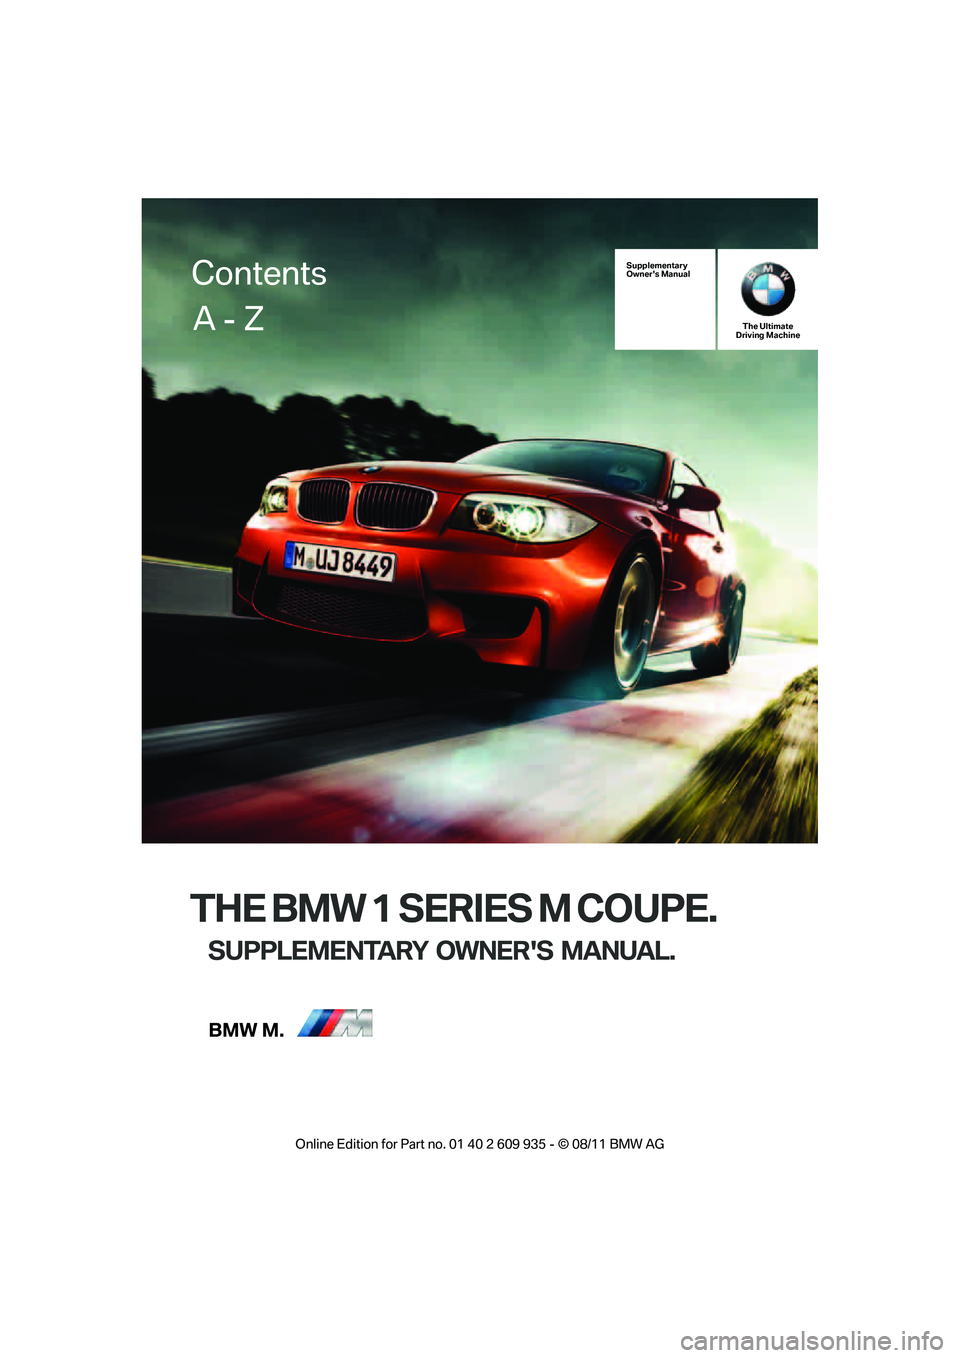 BMW M COUPE 2011  Owners Manual THE BMW 1 SERIES M COUPE.
SUPPLEMENTARY OWNERS MANUAL.
Supplementary
Owners ManualThe Ultimate
Driving Machine
Contents
A - Z
Online  Edition  for Part  no. 01 40 2 609  935 - \251  08/11  BMW AG  